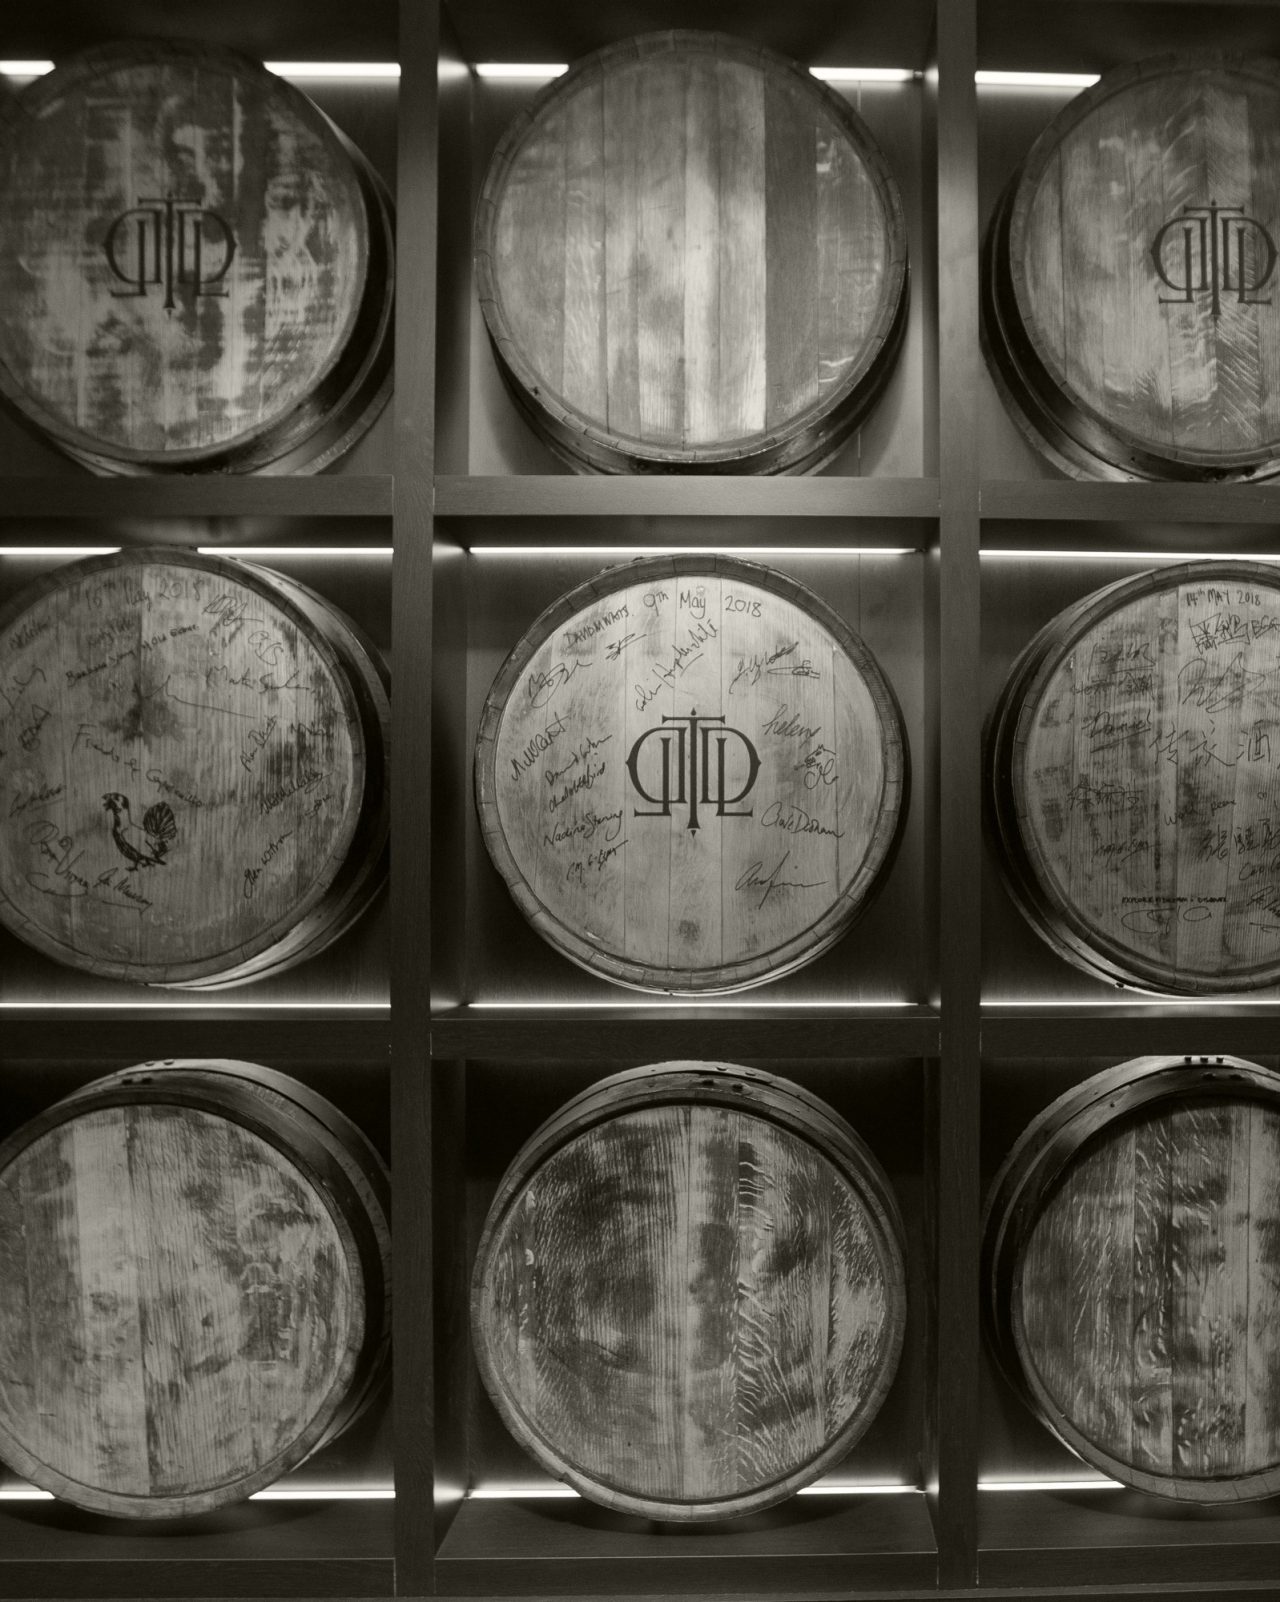 Black and white wall of Last Drop barrels